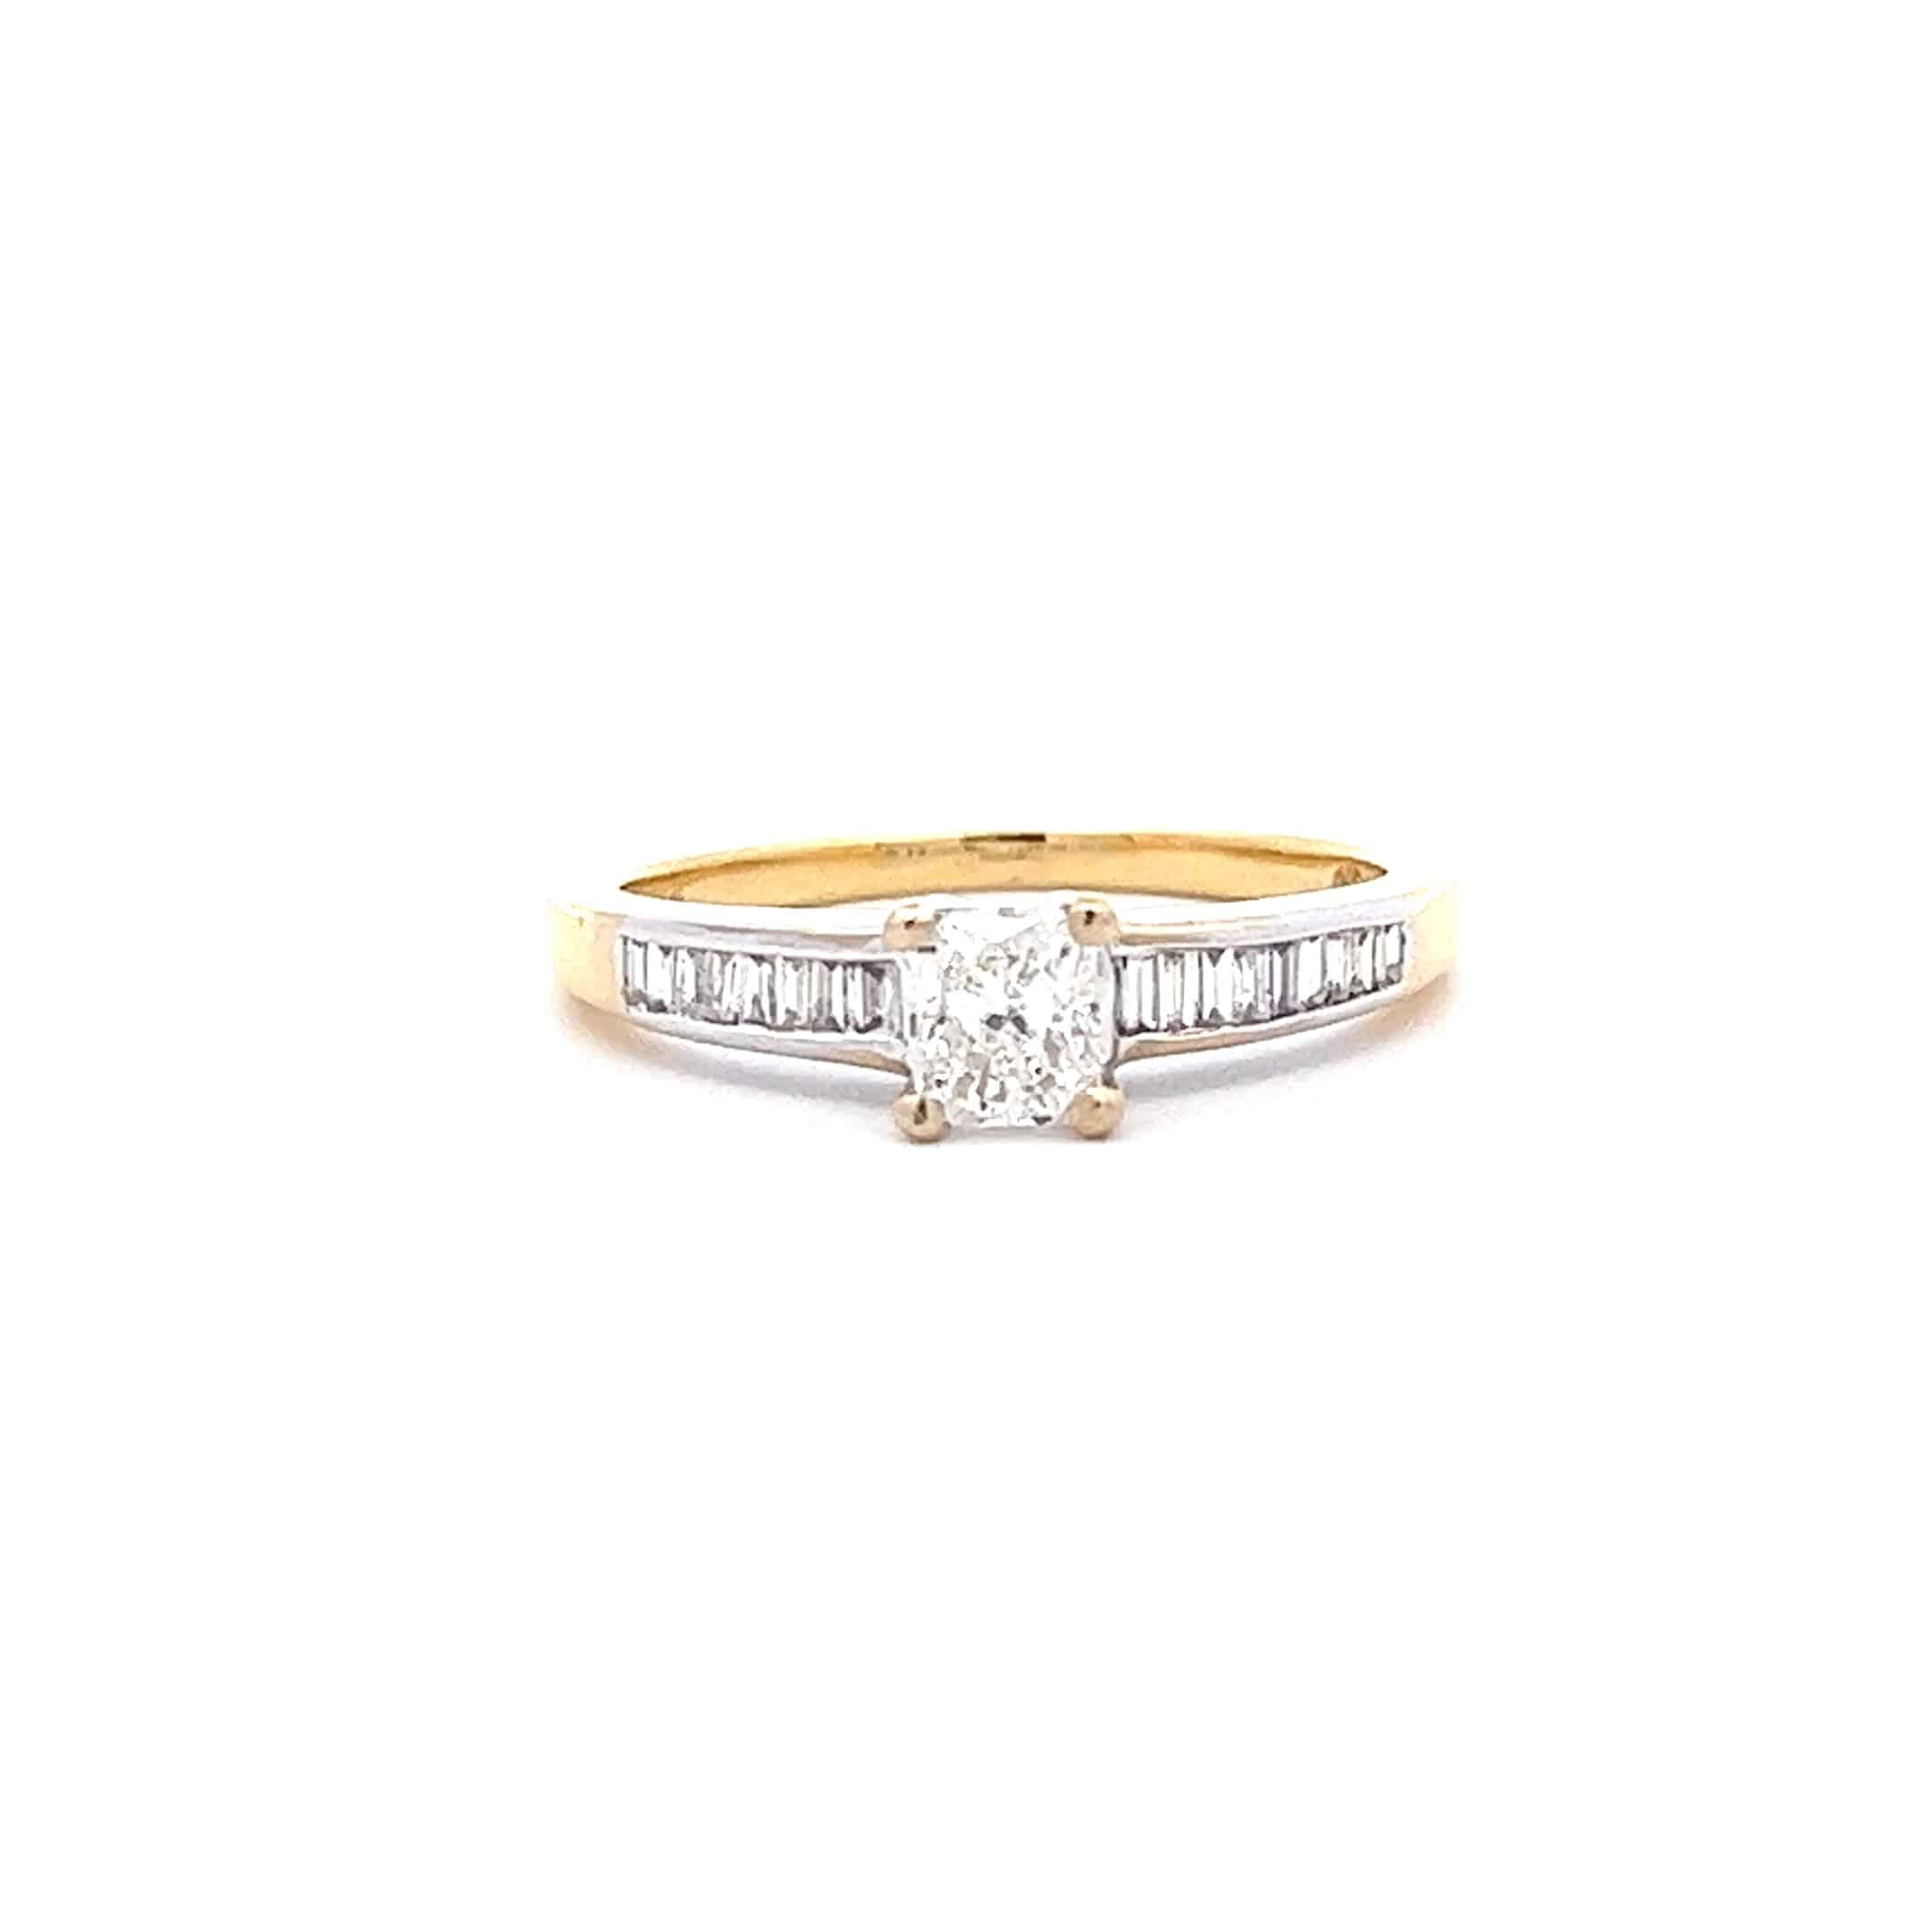 Radiant Cut Diamond Ring with Baguette Cut Diamond Shoulders – Pre-Owned